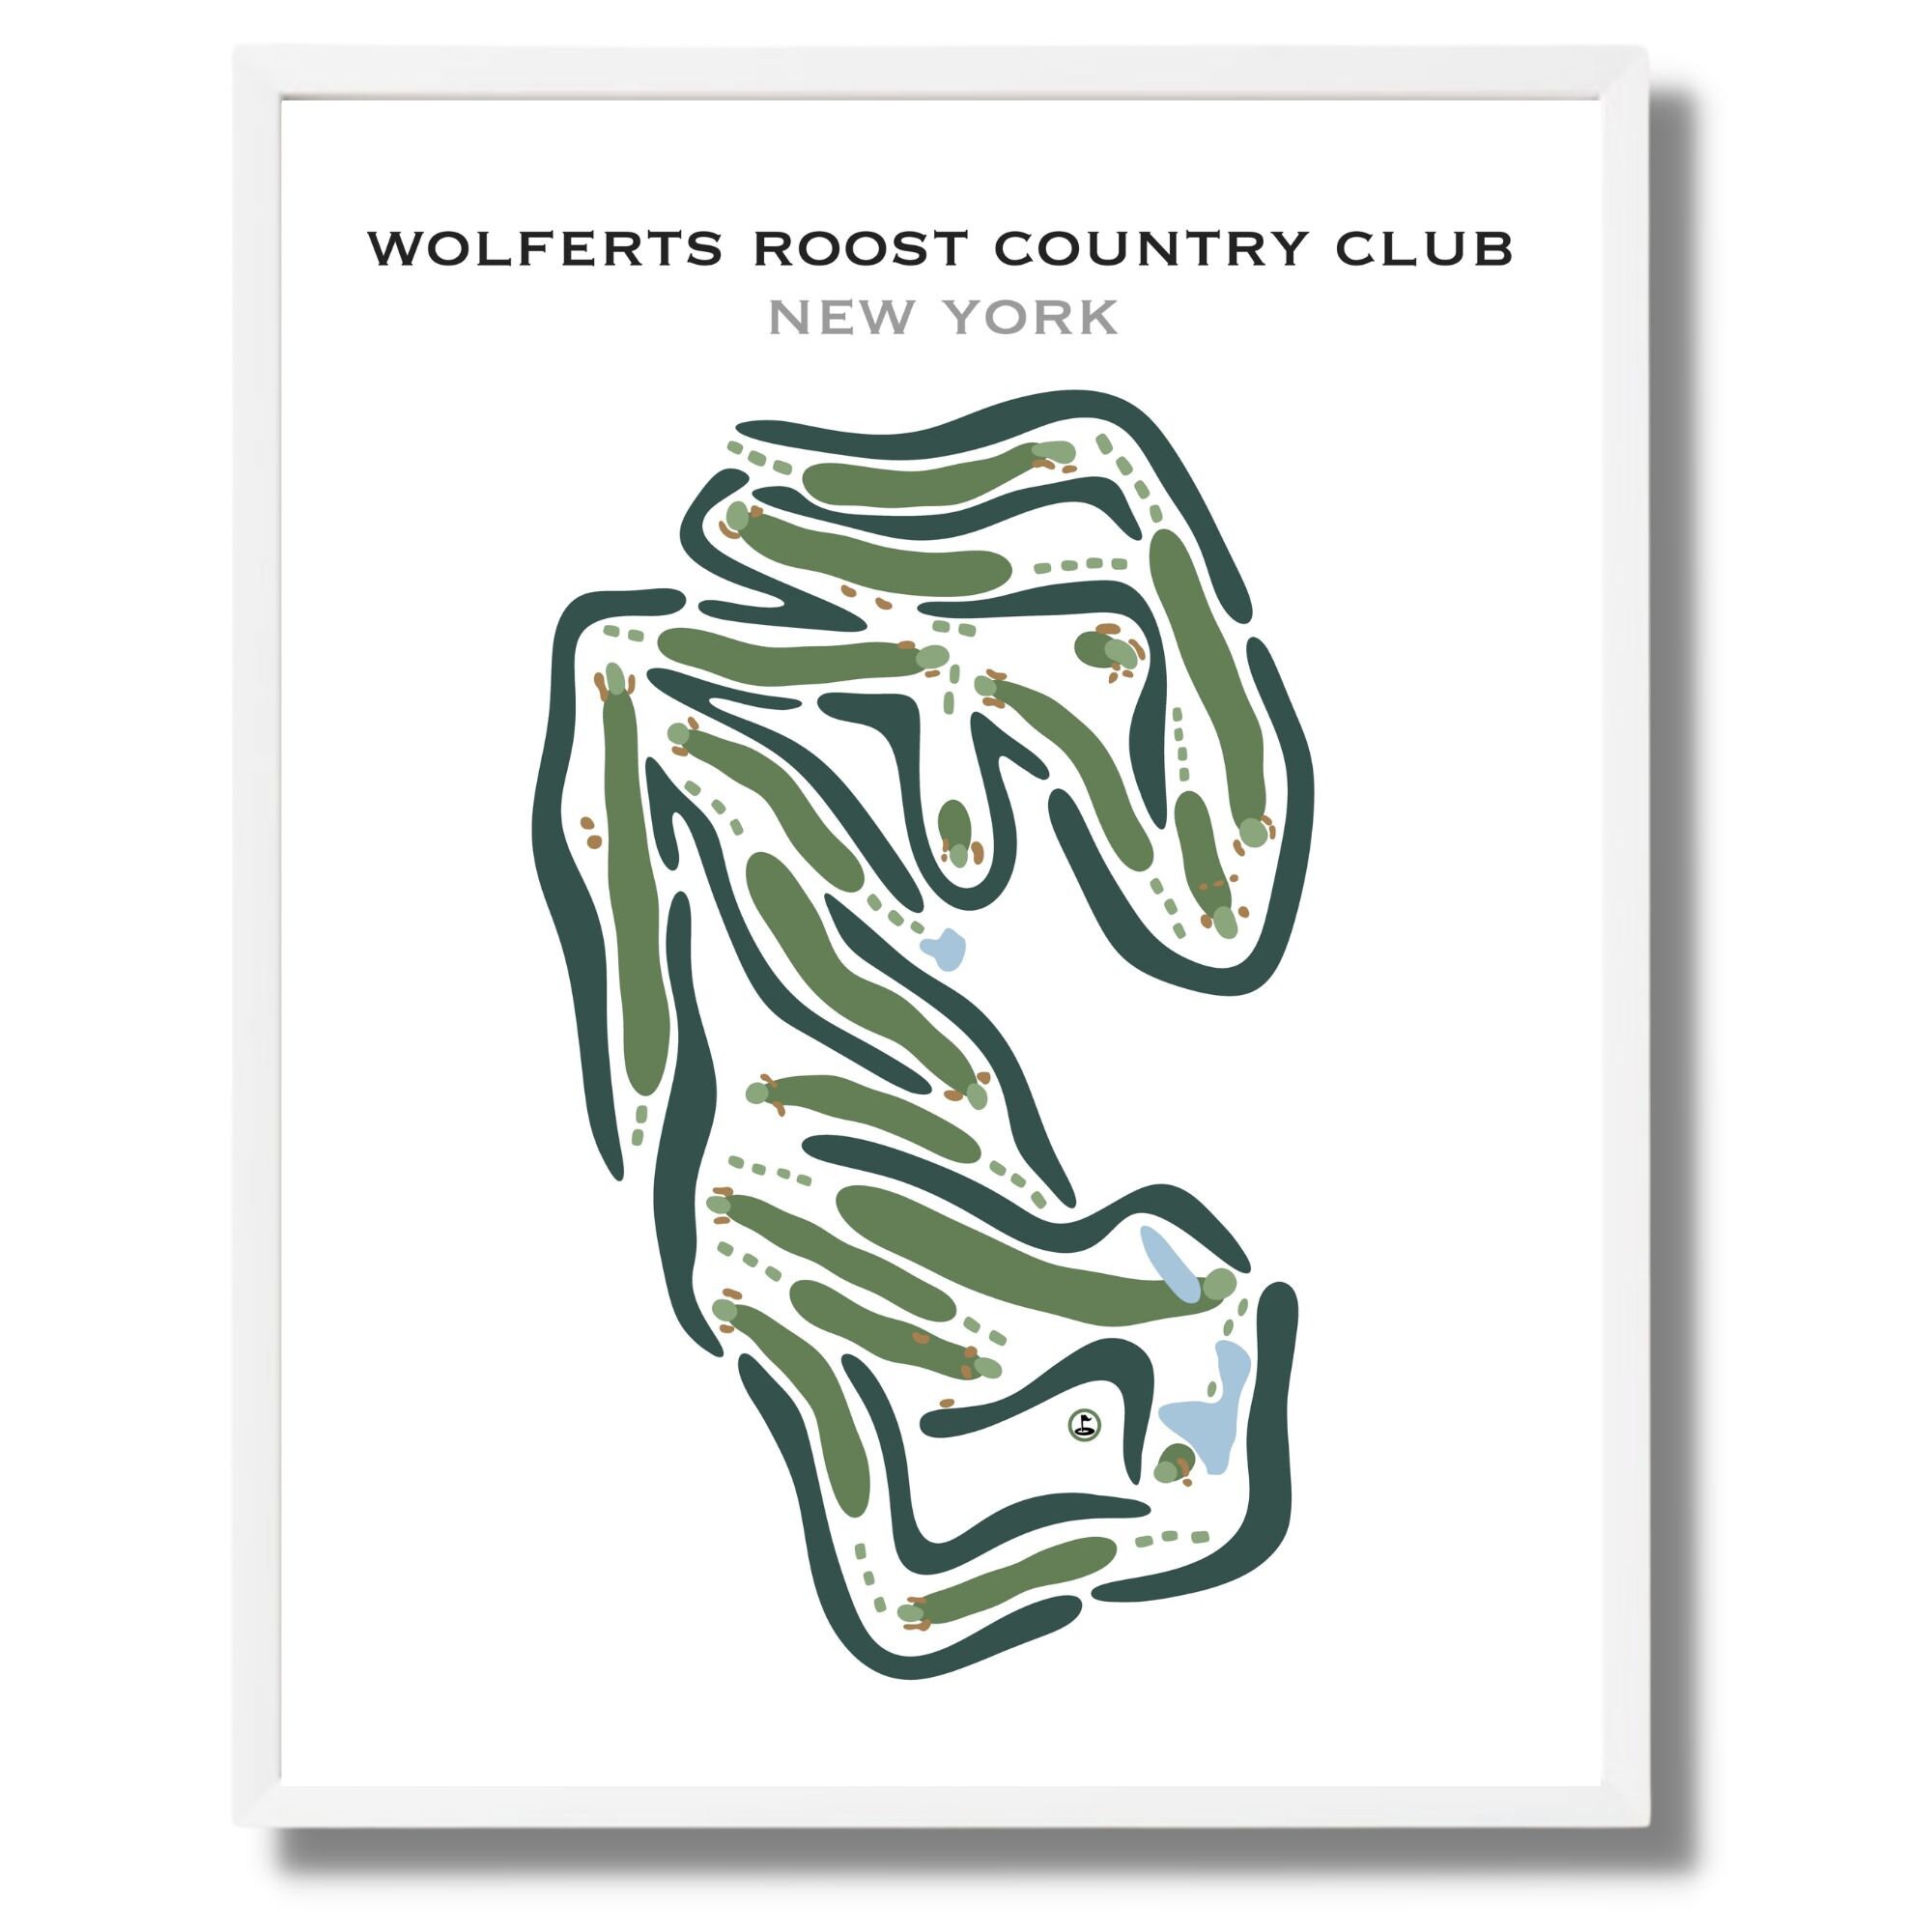 Wolferts Roost Country Club NY Golf Course Maphome image